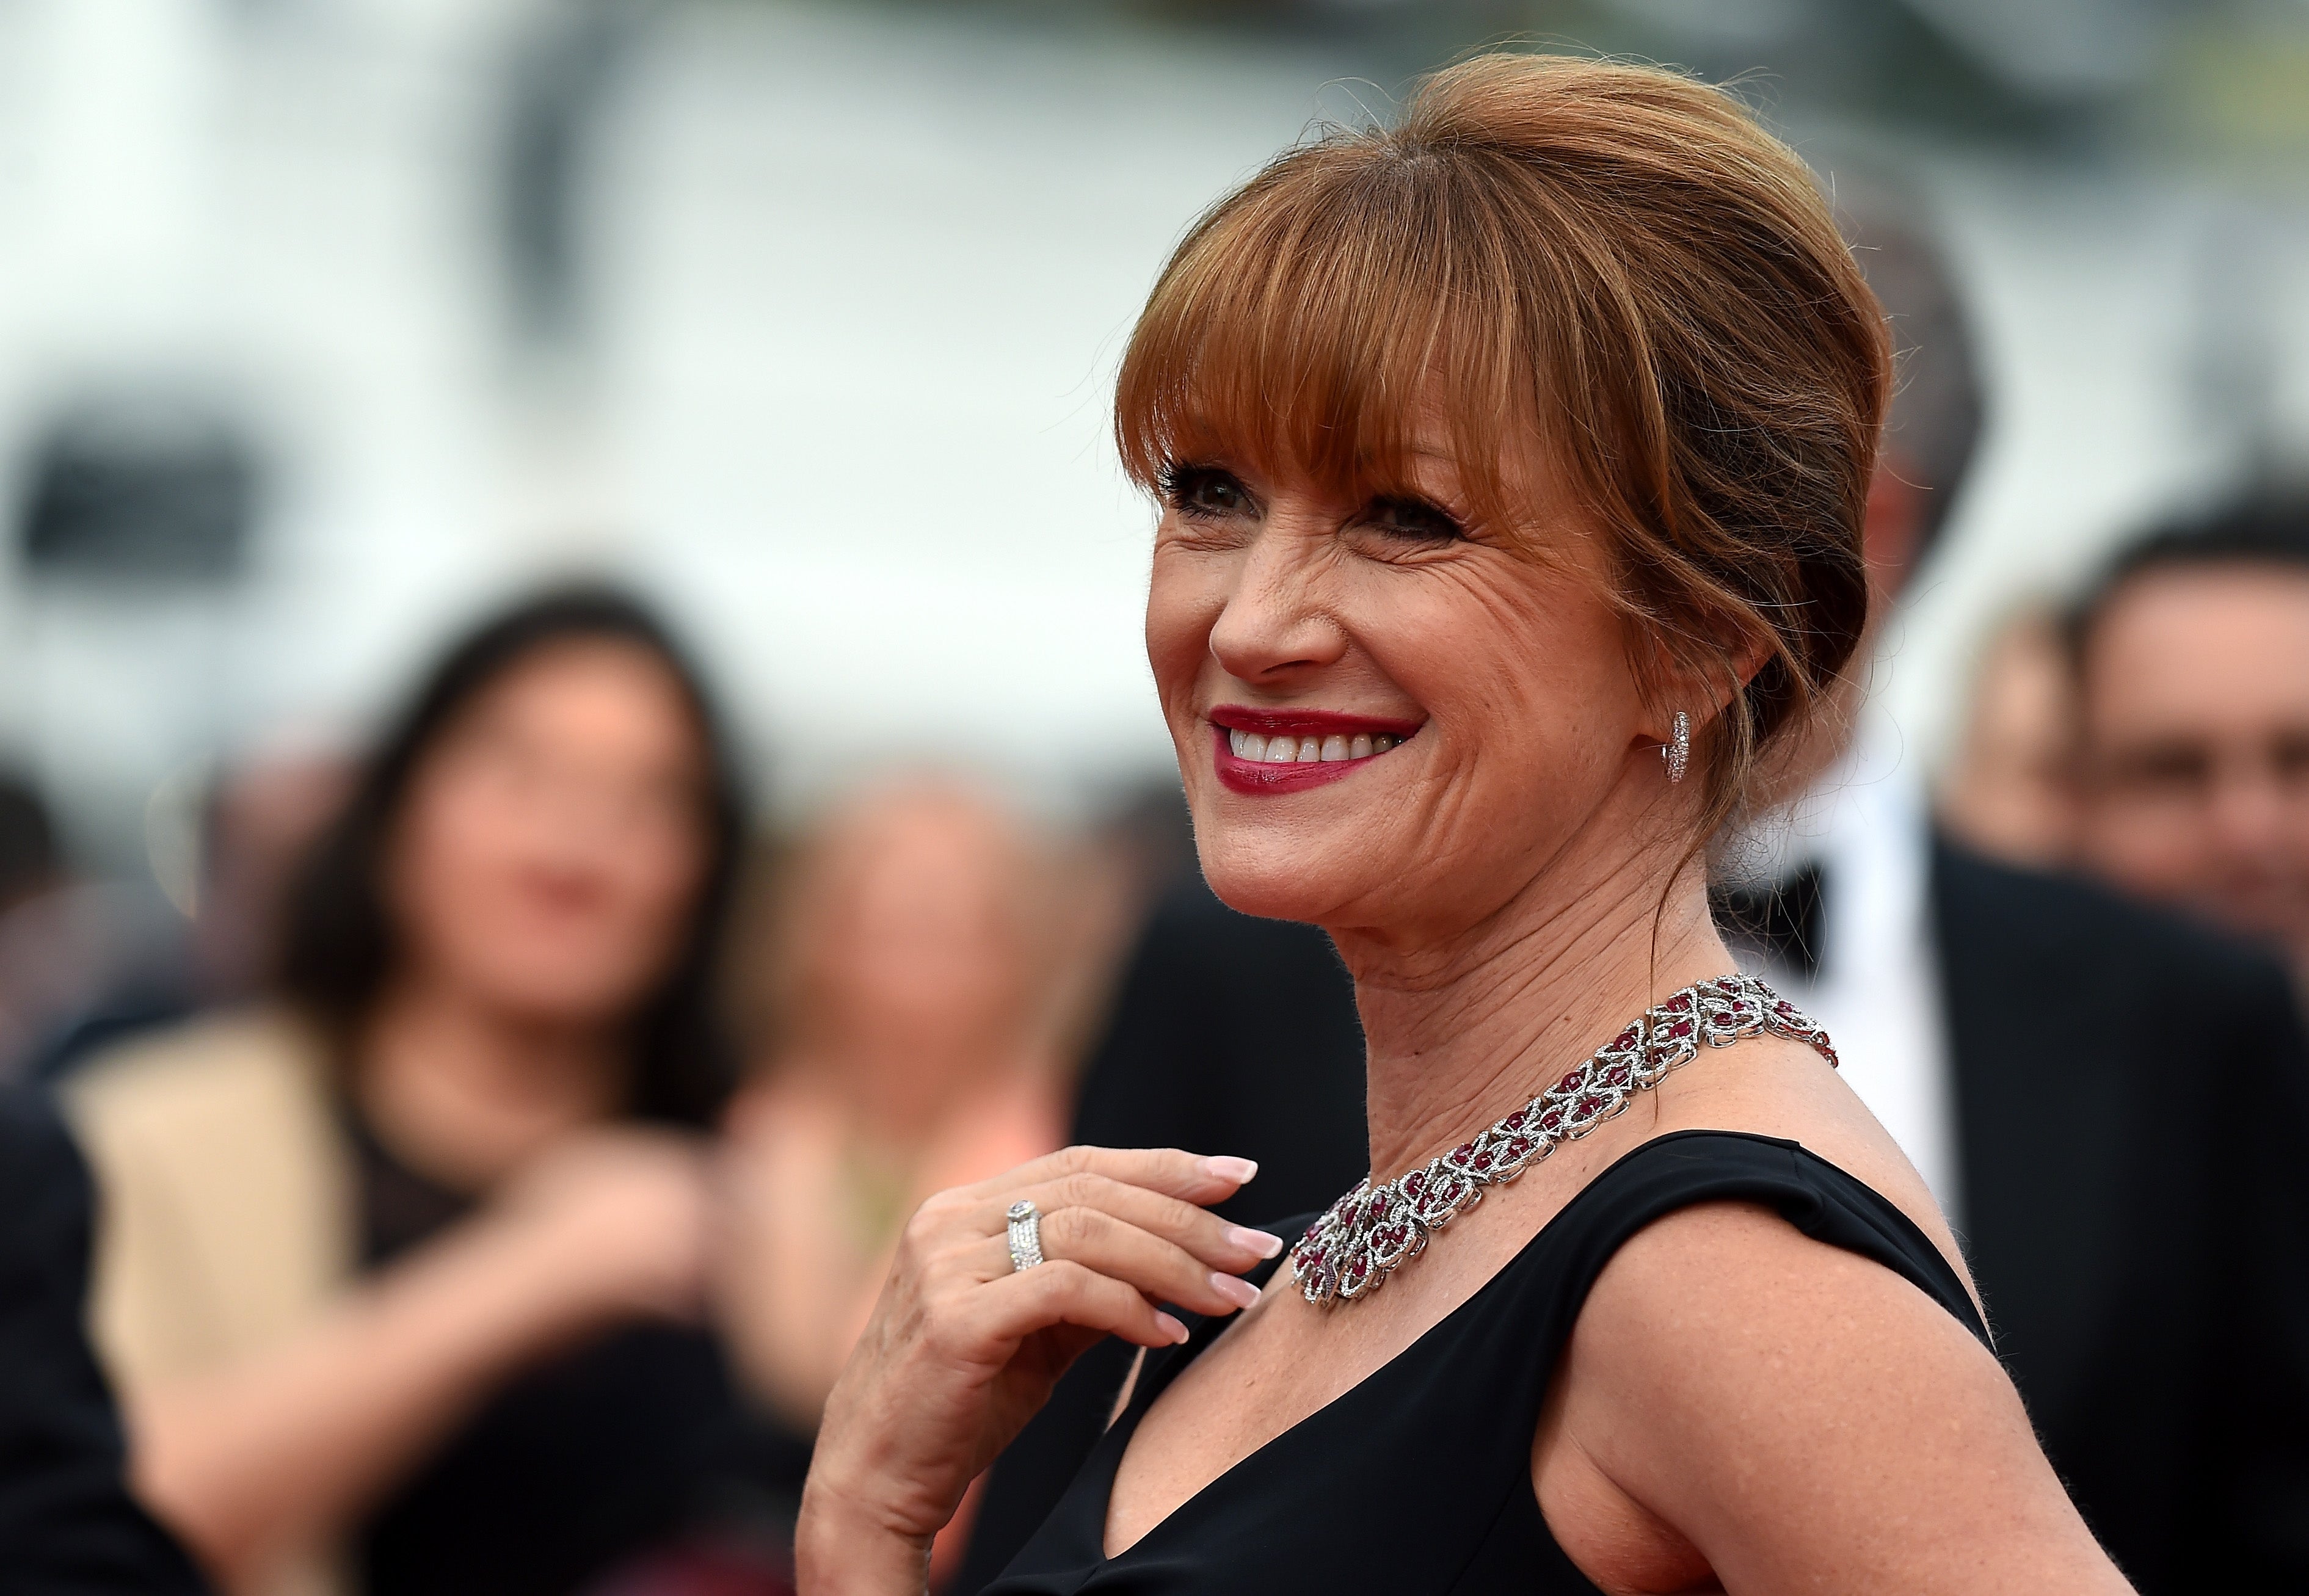 Actor Jane Seymour has said her sex life is better than ever